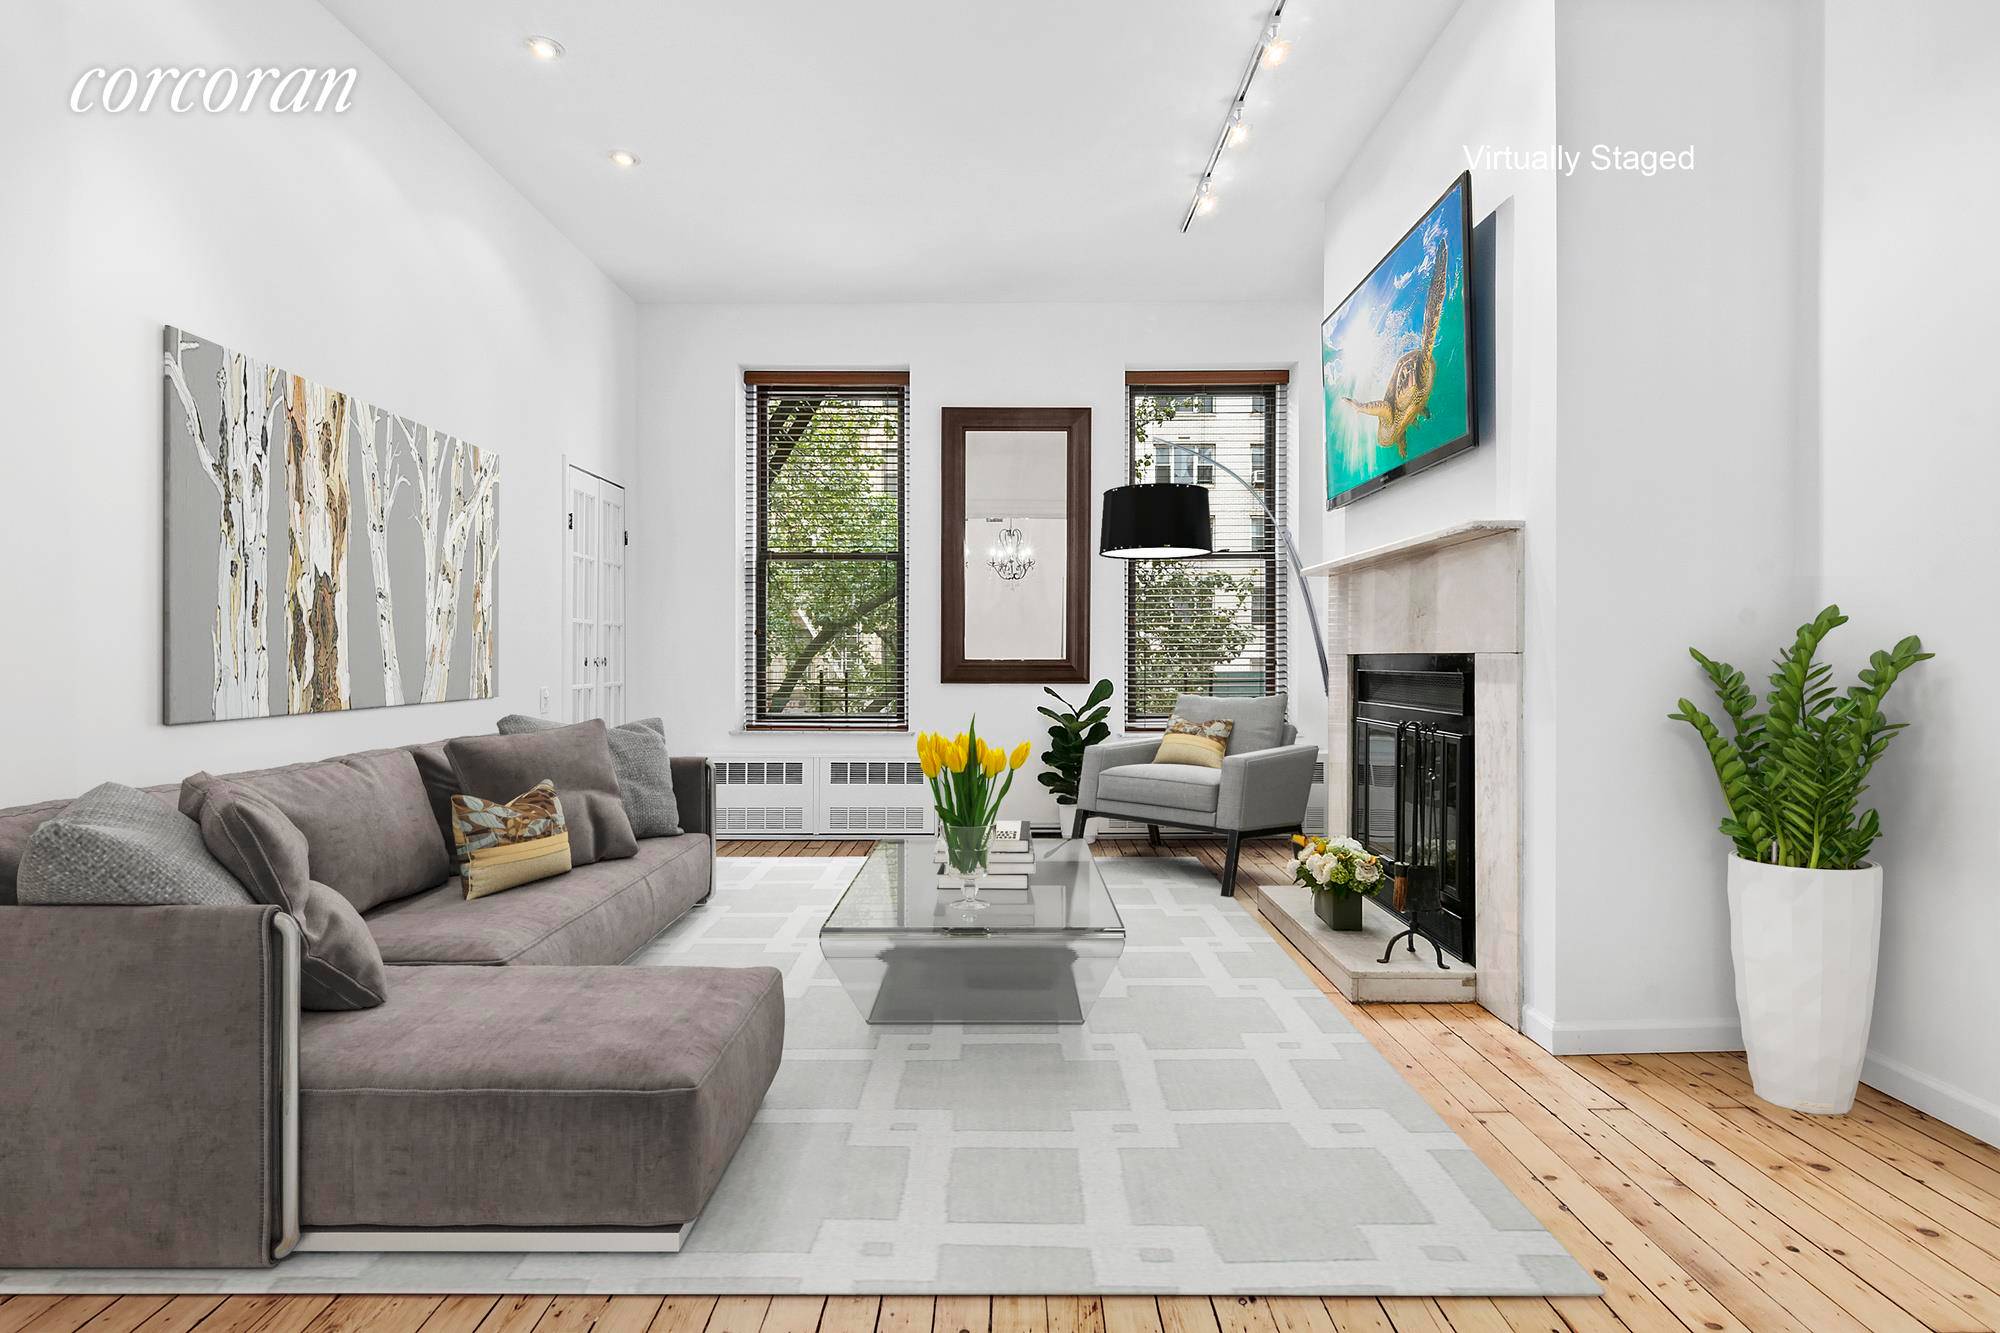 Have it all in this outstanding 3 Bedroom 2 bath parlor floor through with wood burning fireplace and large private terrace which is a true oasis in the bustling city.